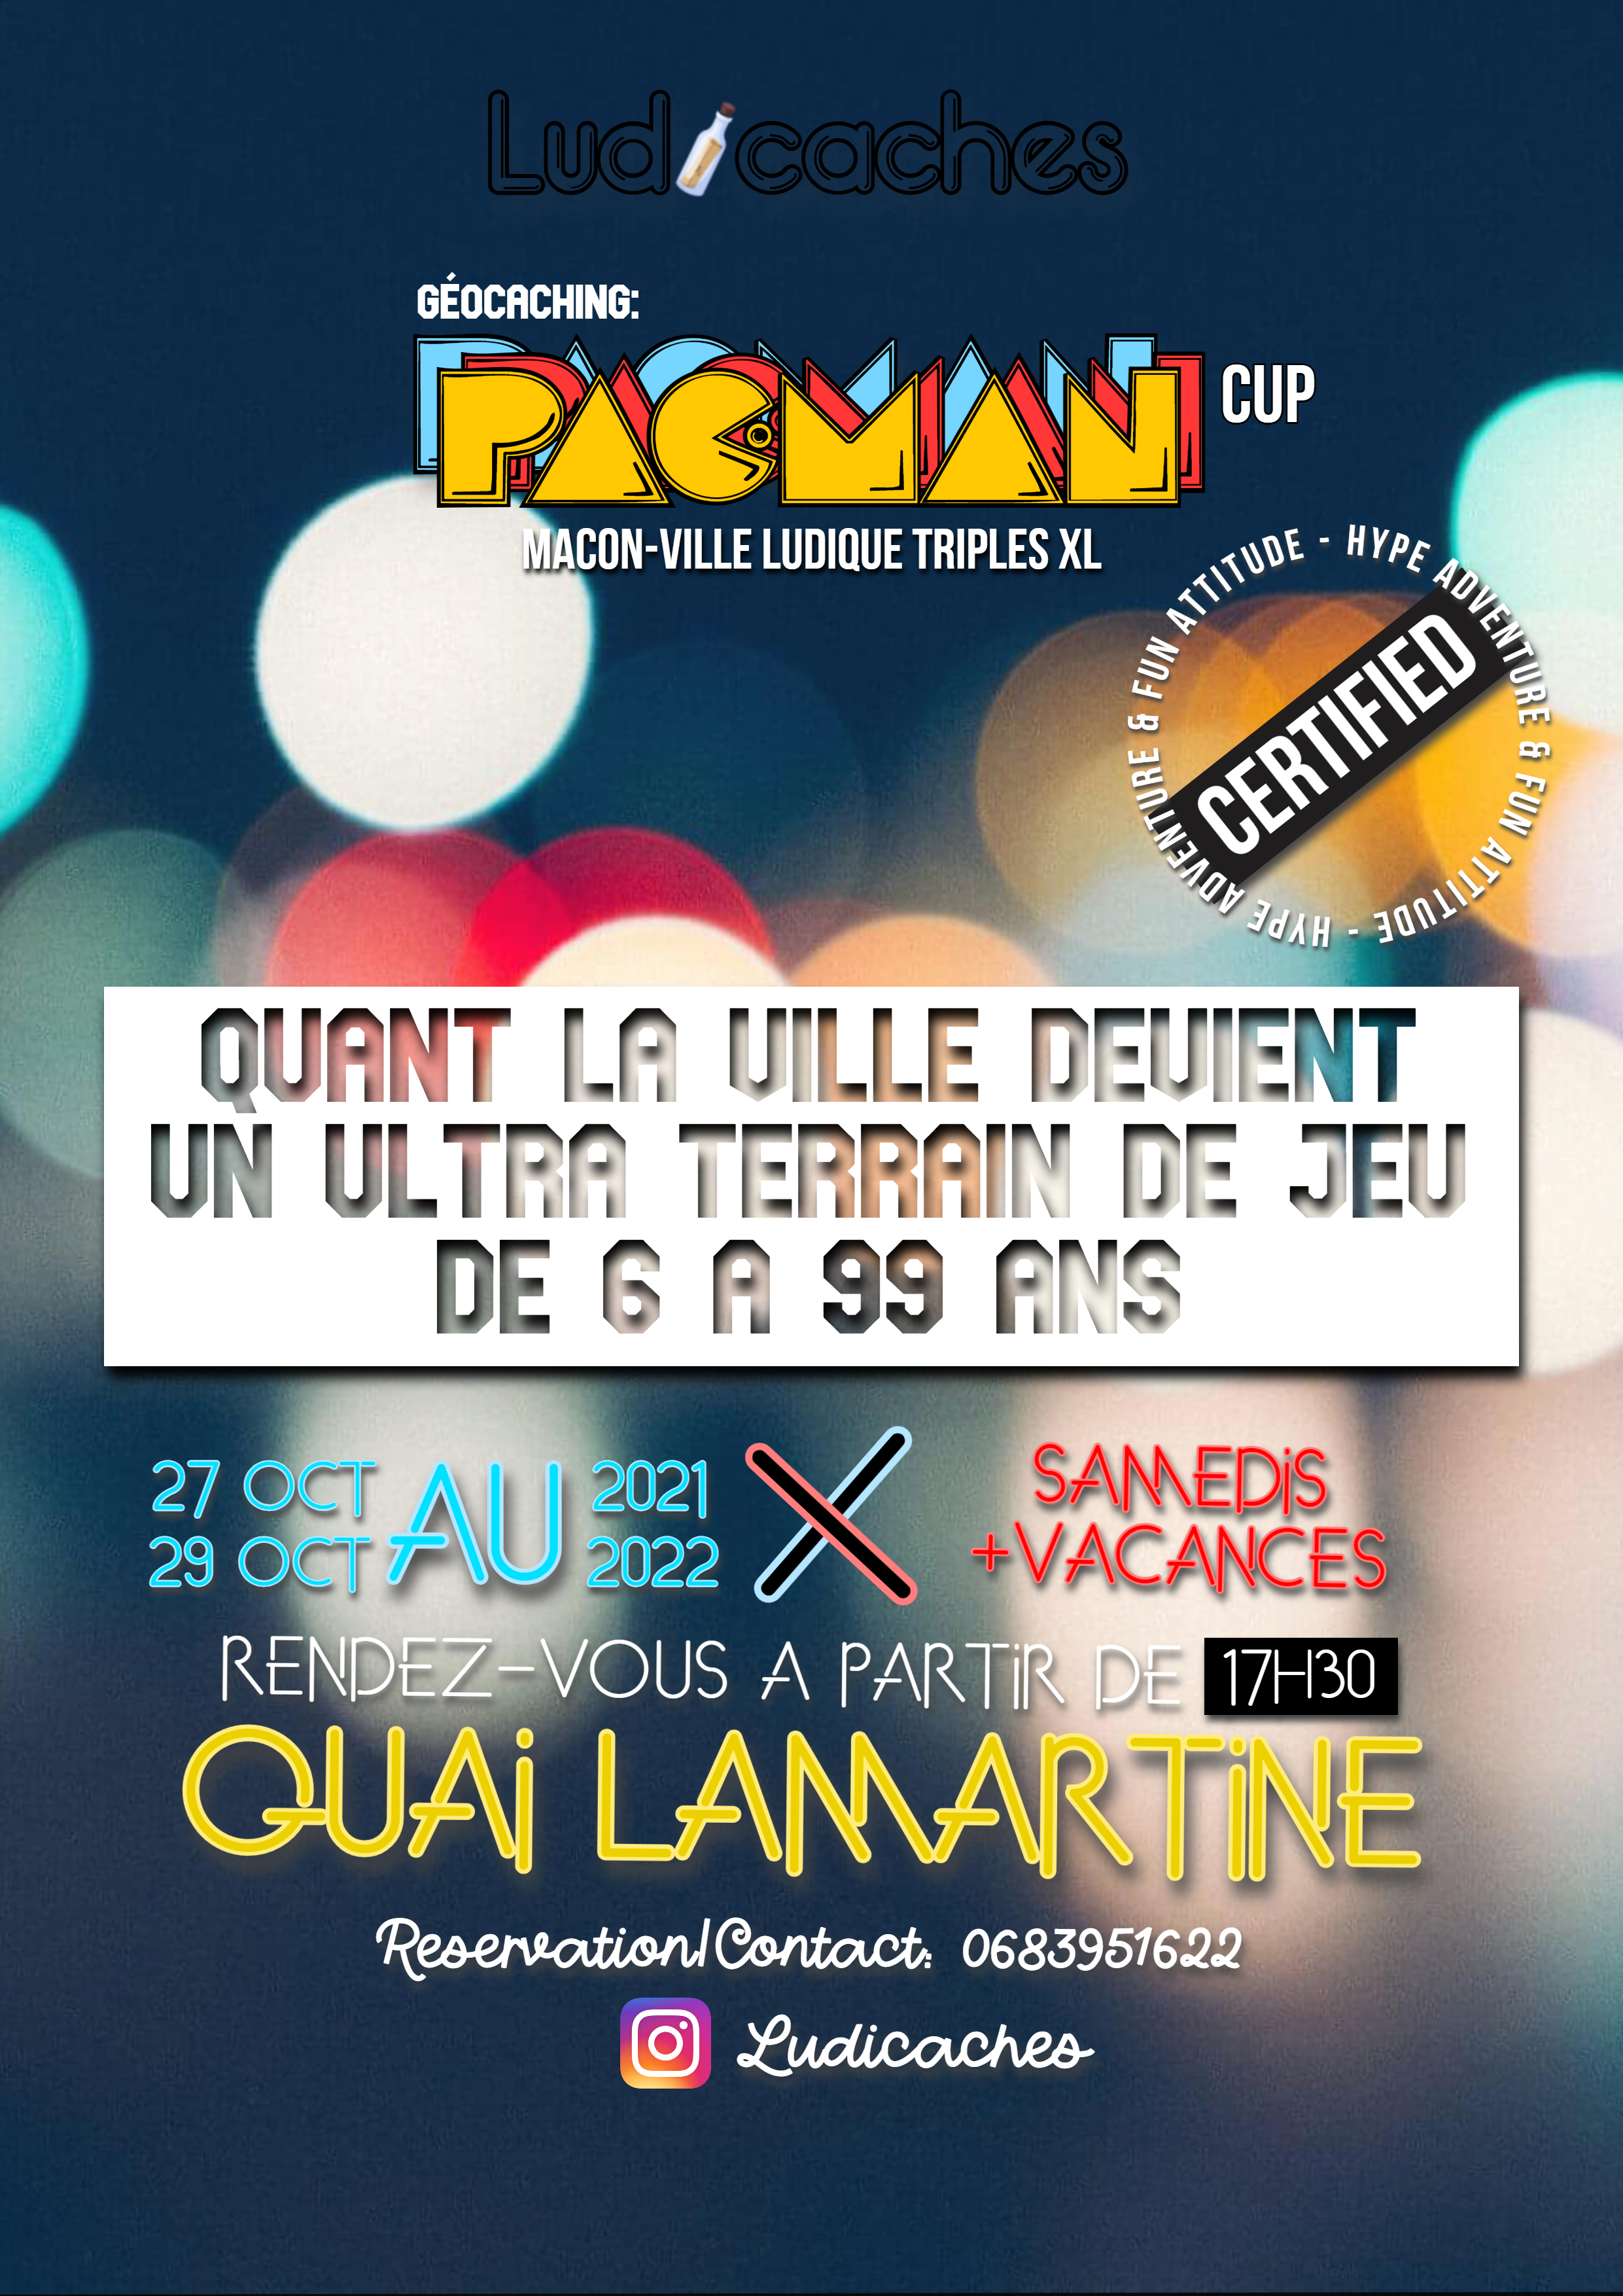 Pacman Cup